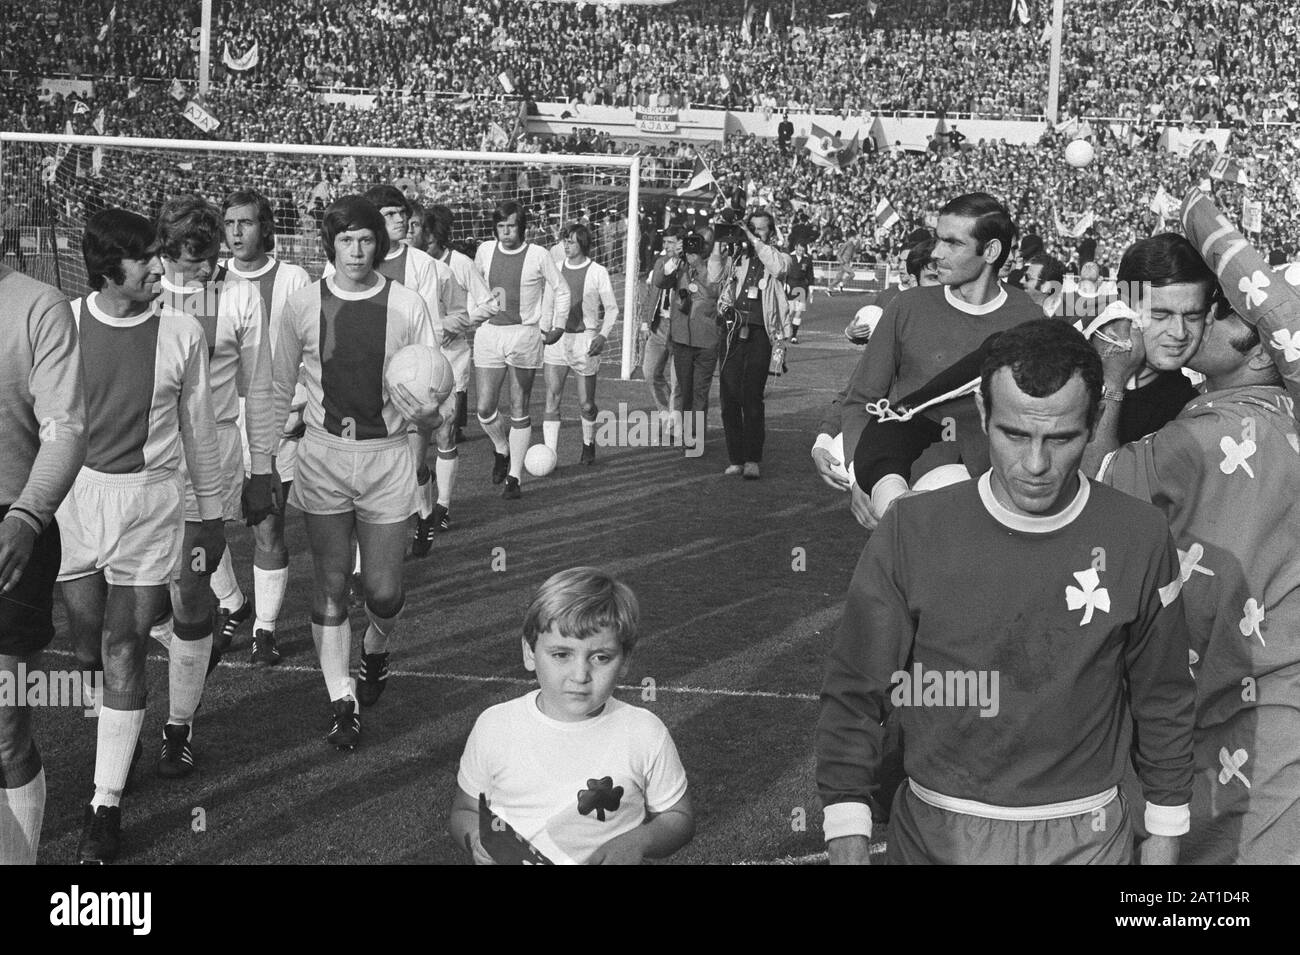 Europa Cup final Ajax against Panathinaikos 2-0 Elves arrive the field on  Date: 2 June 1971 Location: Great Britain, London Keywords: sport,  football, football players Institution name: Europe Cup, Panathinaikos  Stock Photo - Alamy